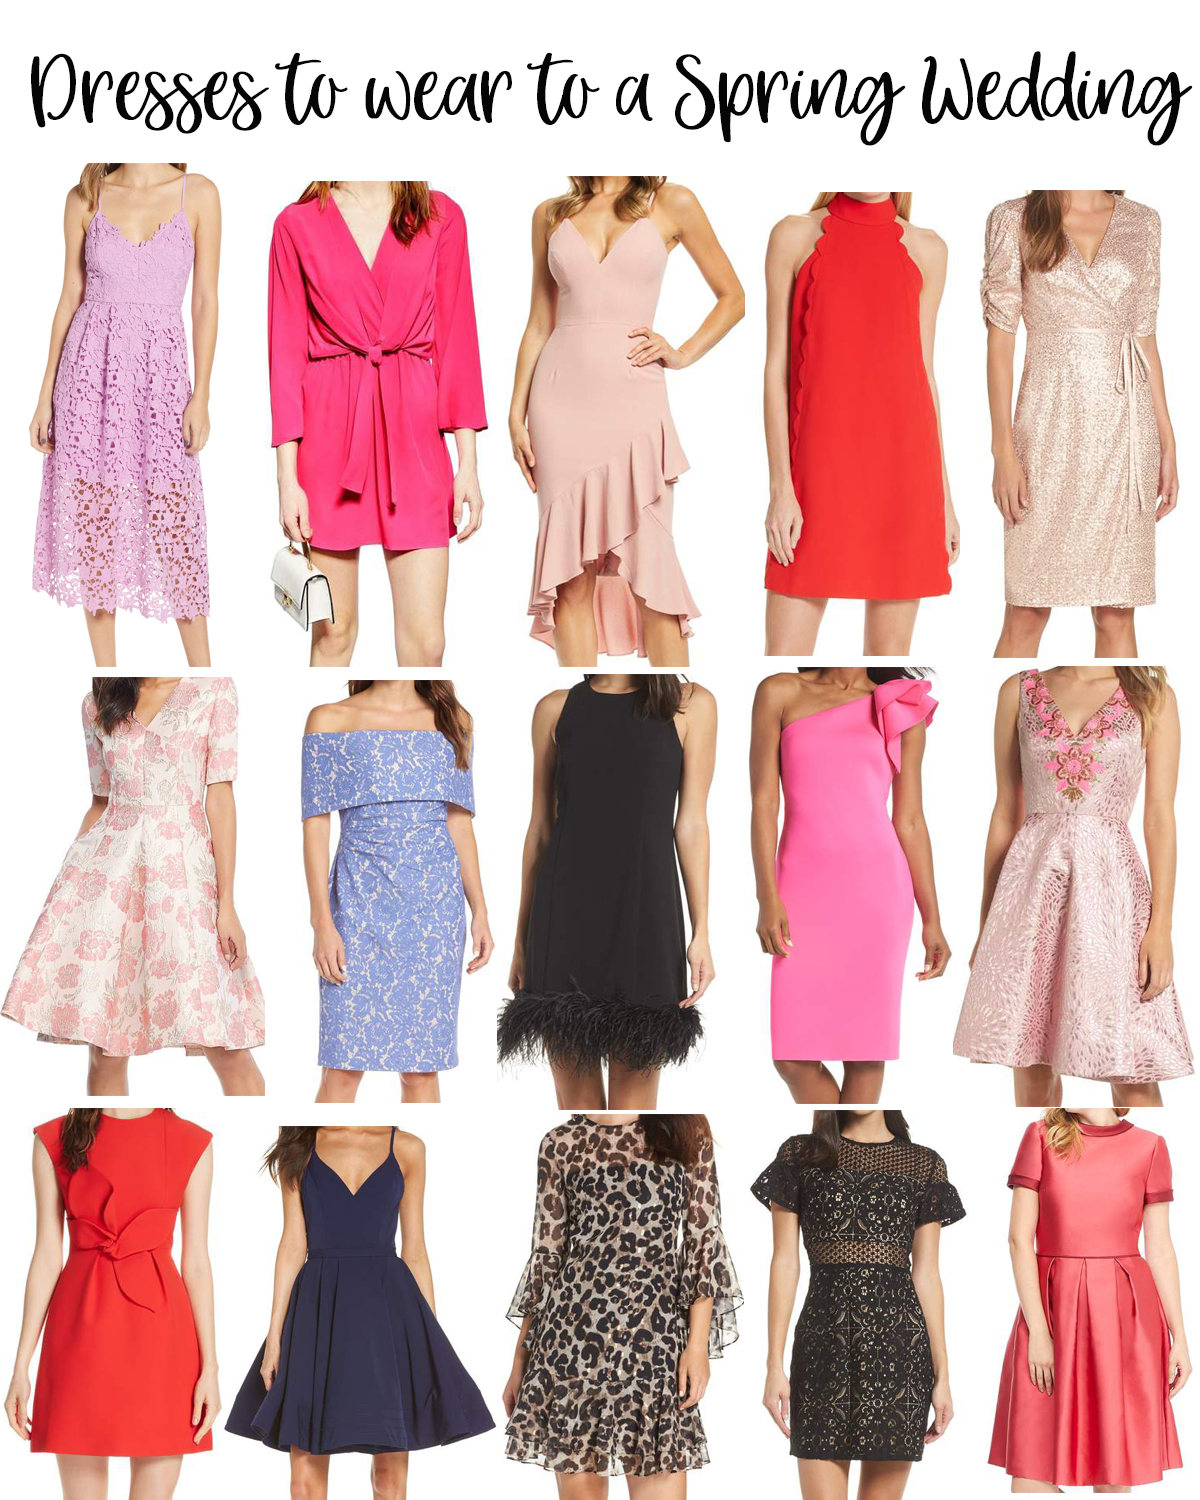 Dresses to Wear to a Spring Wedding ...